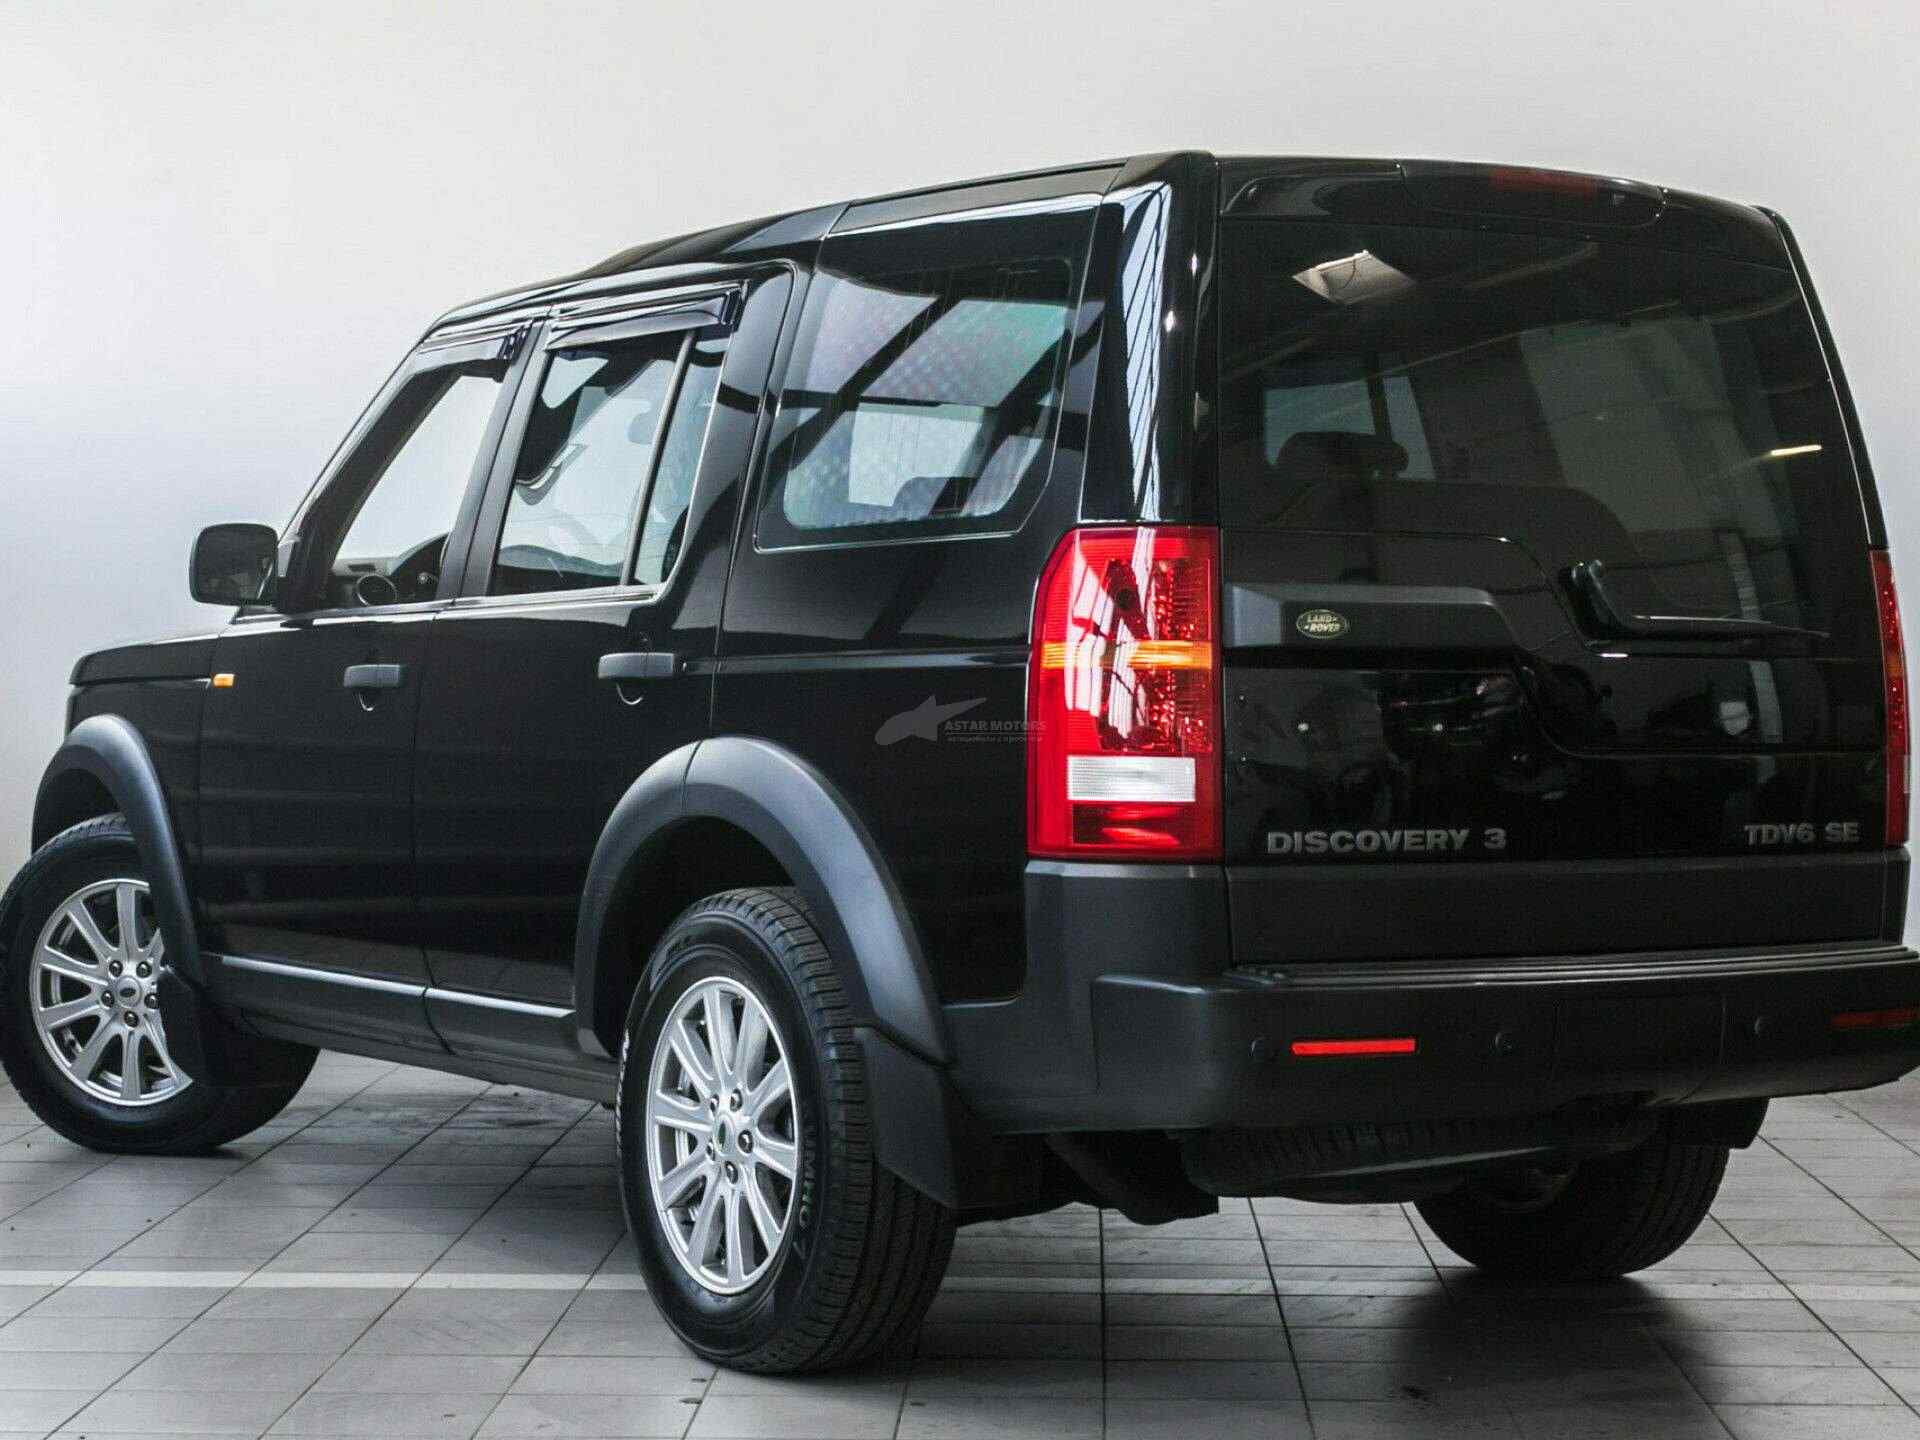 Дискавери 2.7 отзывы. Land Rover Discovery 2.7 at. Land Rover Discovery 2007. Антикрен Дискавери 2. Оксфорд Дискавери 2.